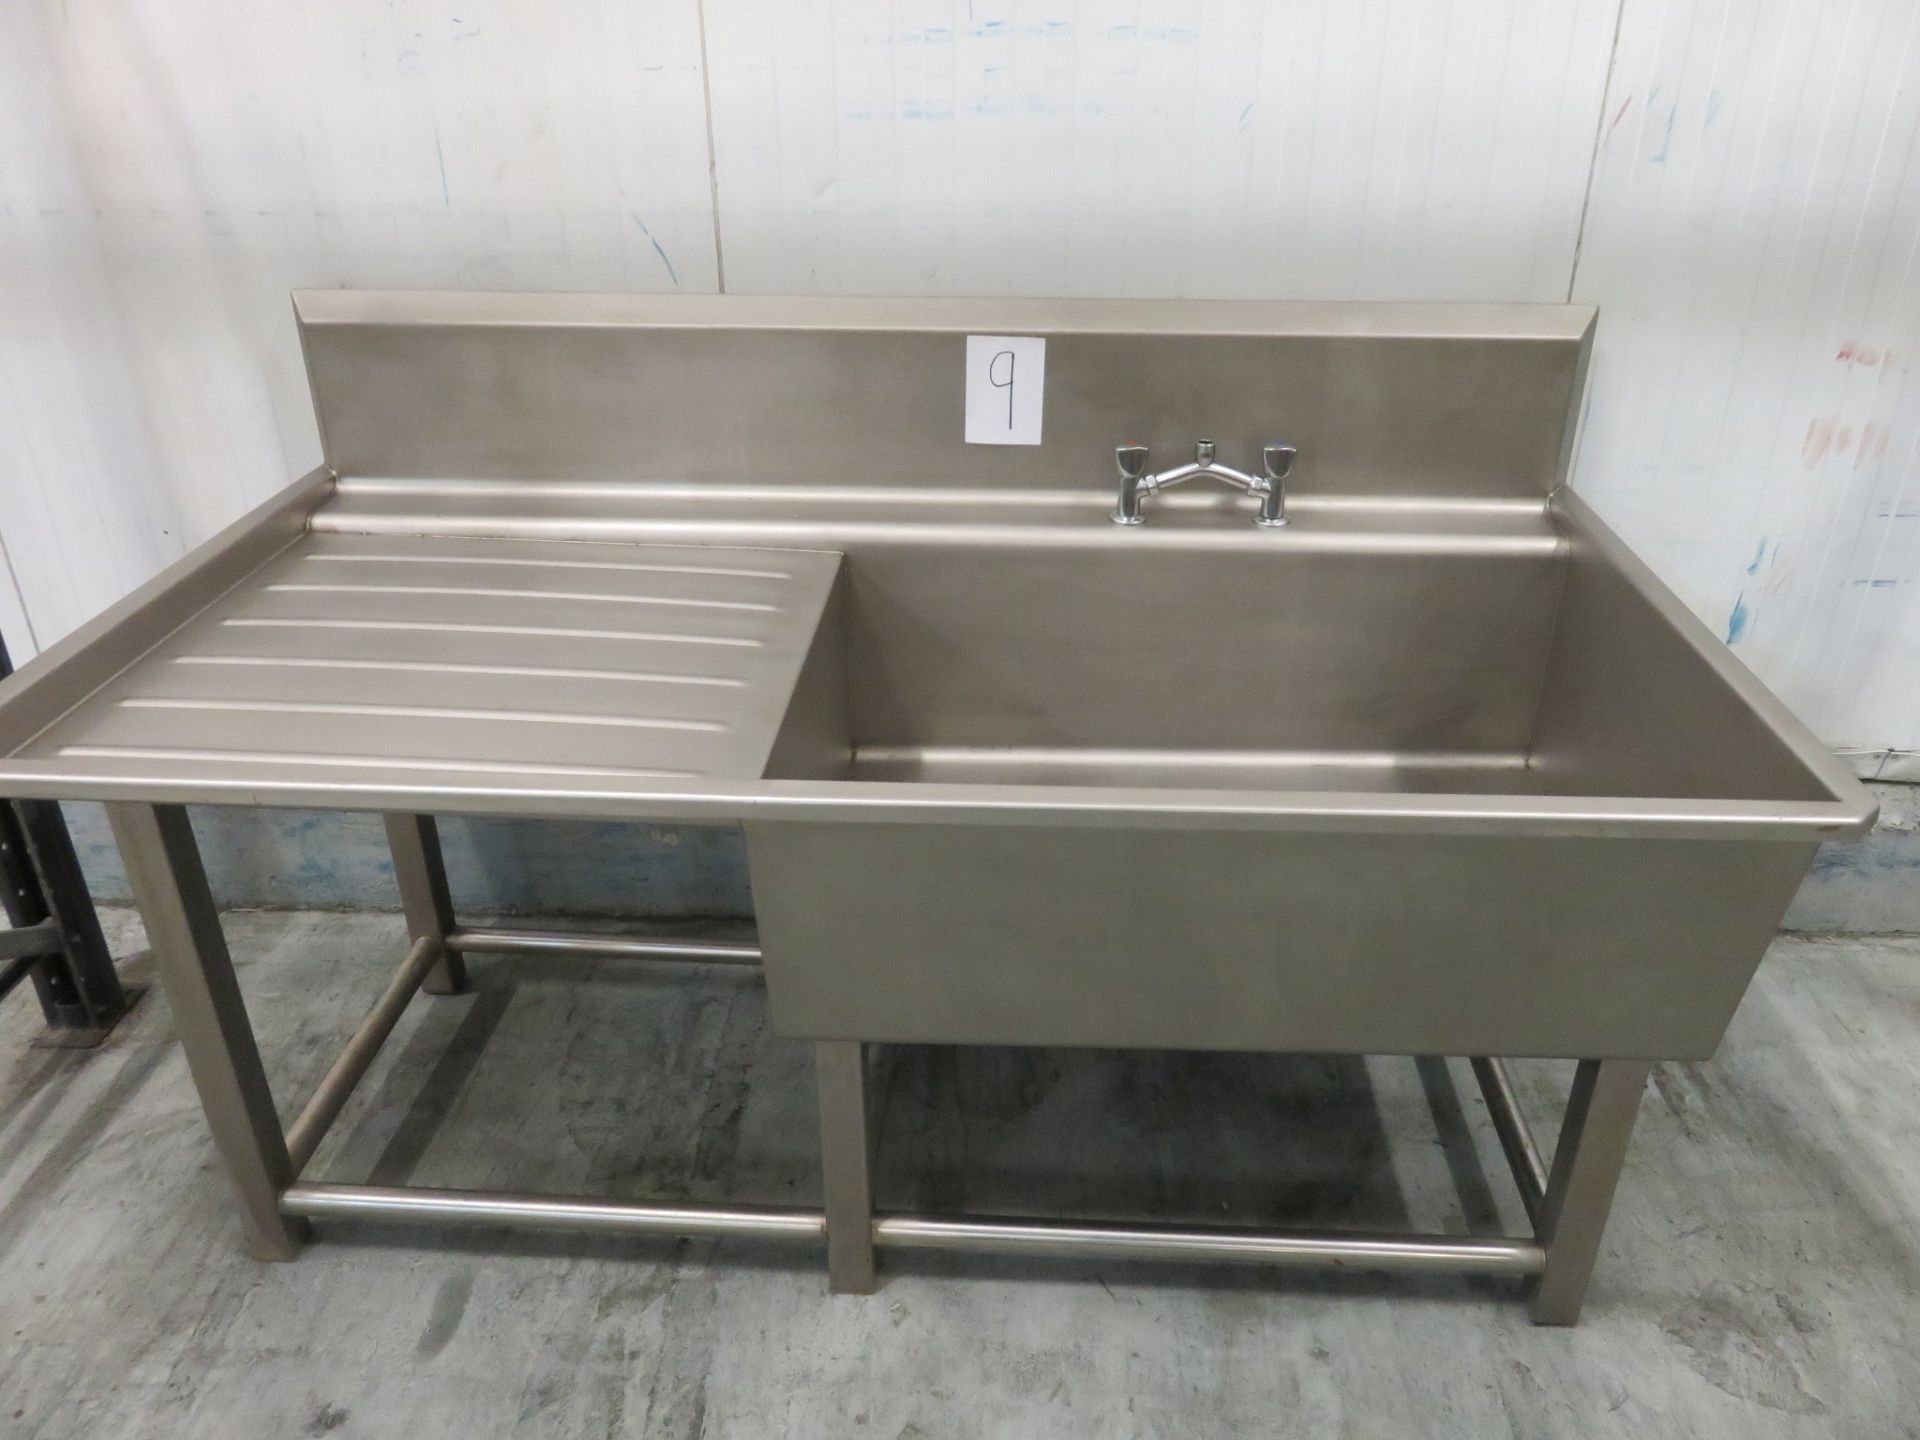 S/s Sink. Hot & Cold Tap. sink 700 x 900 x 360mm deep. Overalll 900 x 1700mm long.LIFT OUT £20